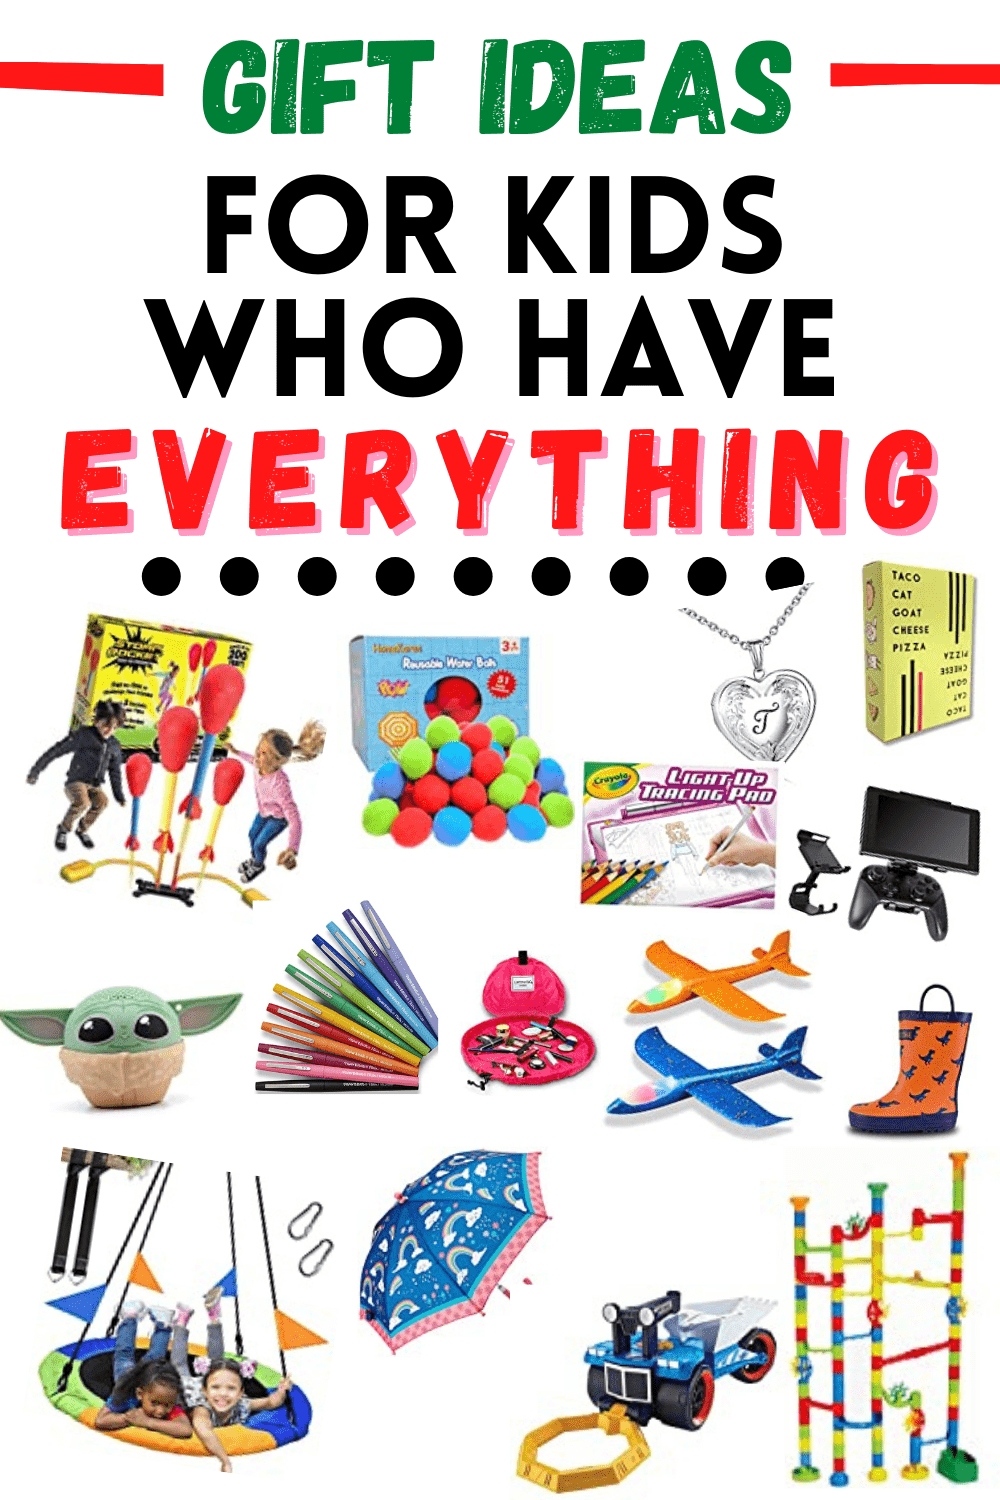 Christmas gift ideas for kids who have everything - gifts for kids who have everything 